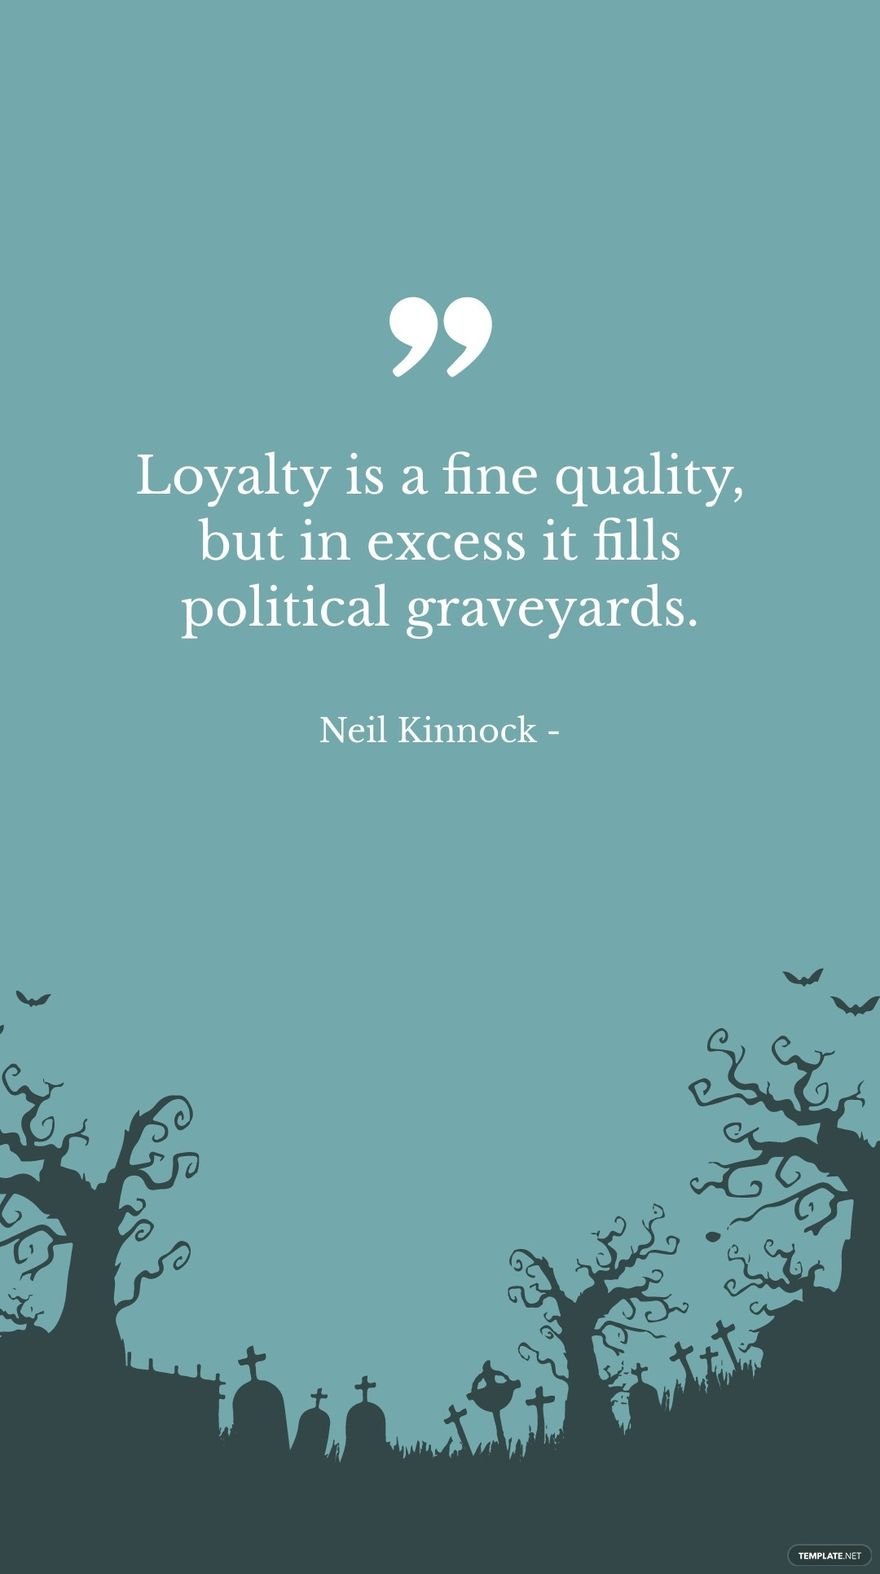 Neil Kinnock - Loyalty is a fine quality, but in excess it fills political graveyards.